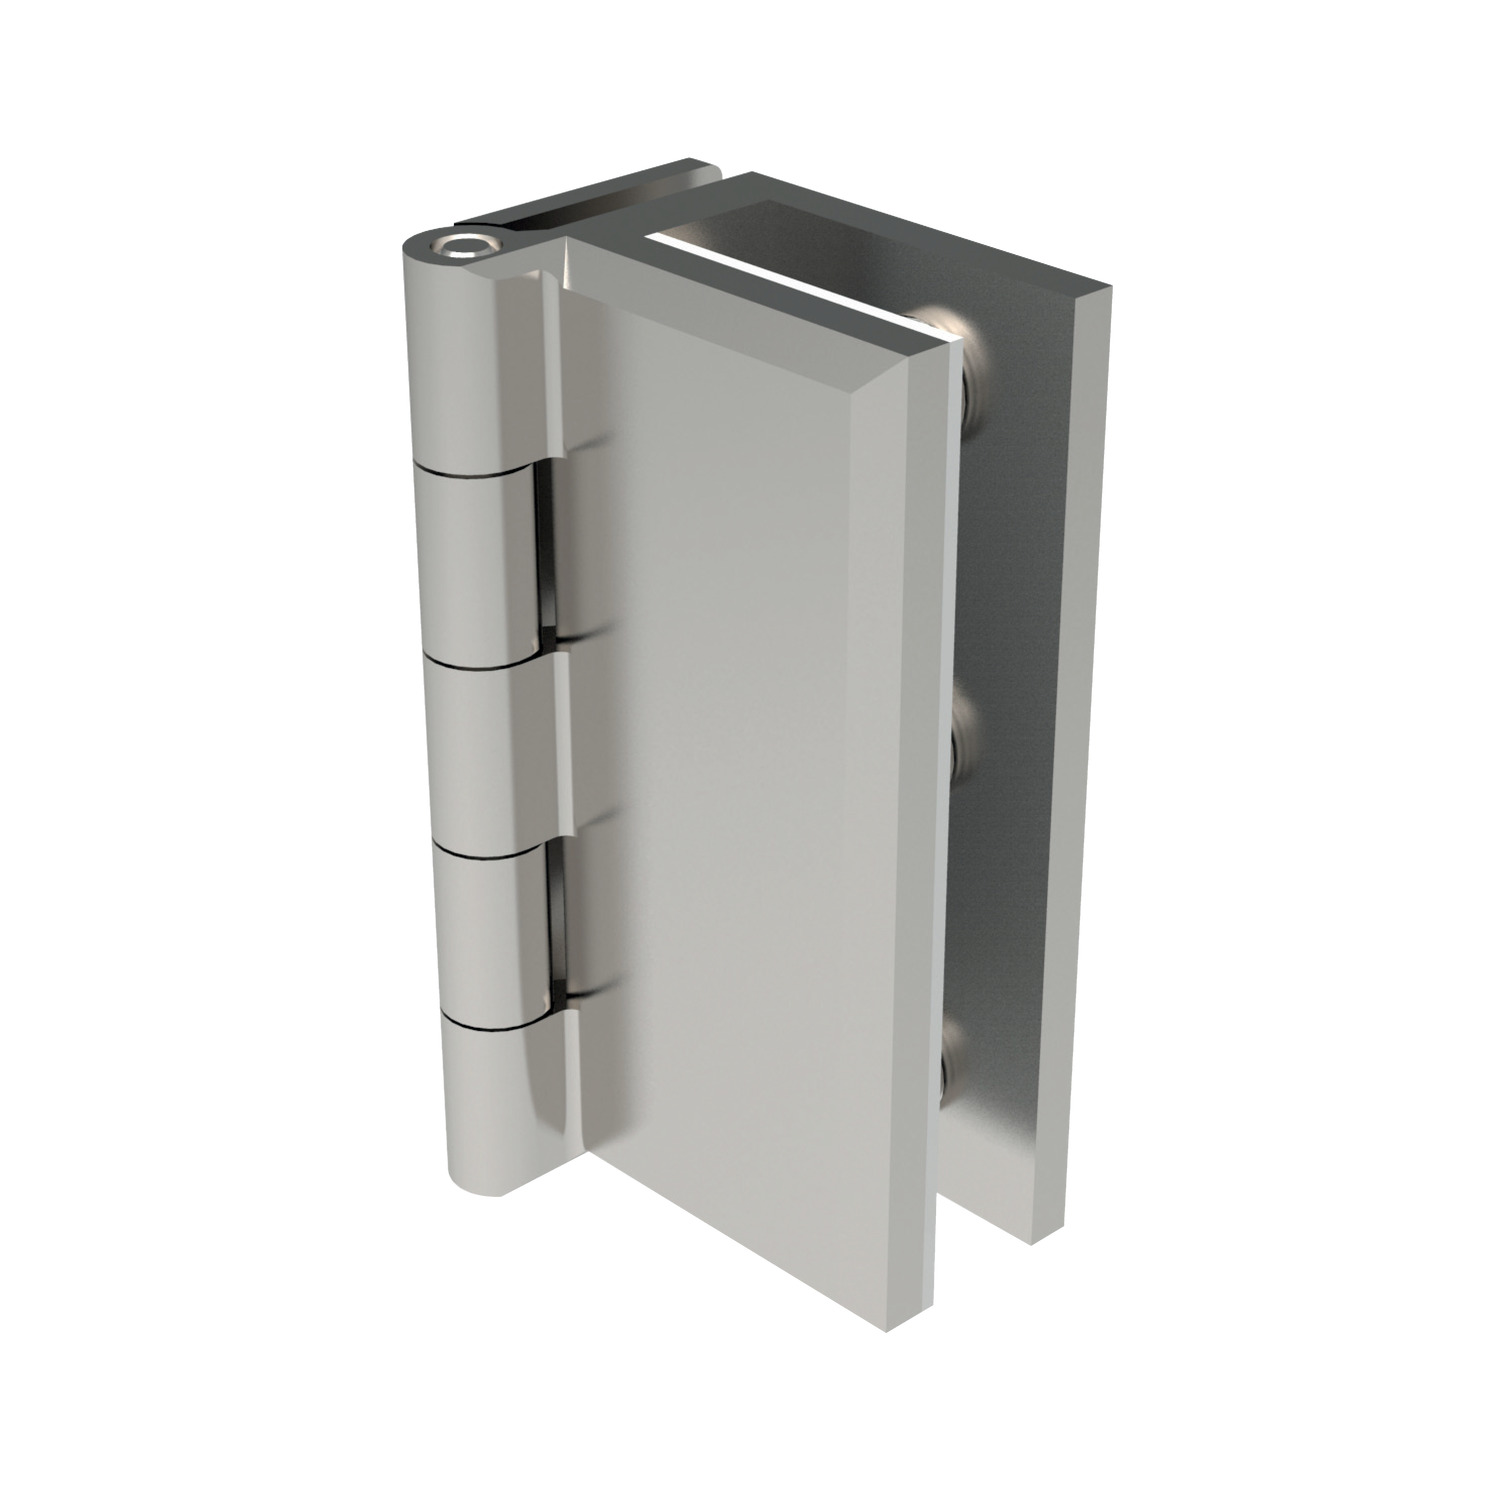 T2260.AC0010 Glass Door Hinges - Set Screw Mount Stainless steel - Glass thickness 4 to 8mm